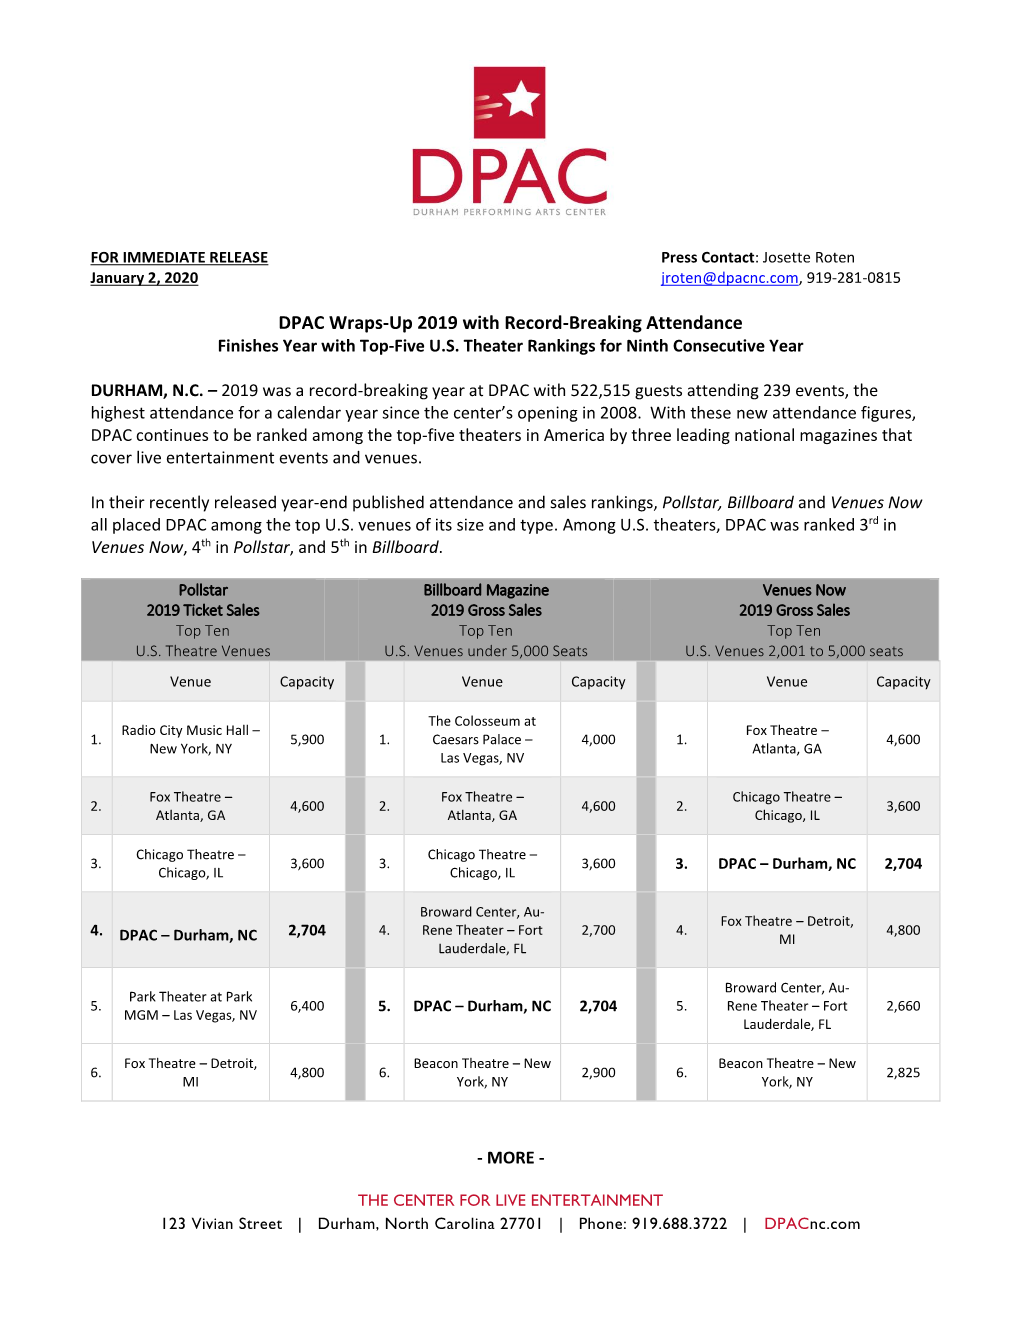 DPAC Wraps-Up 2019 with Record-Breaking Attendance Finishes Year with Top-Five U.S